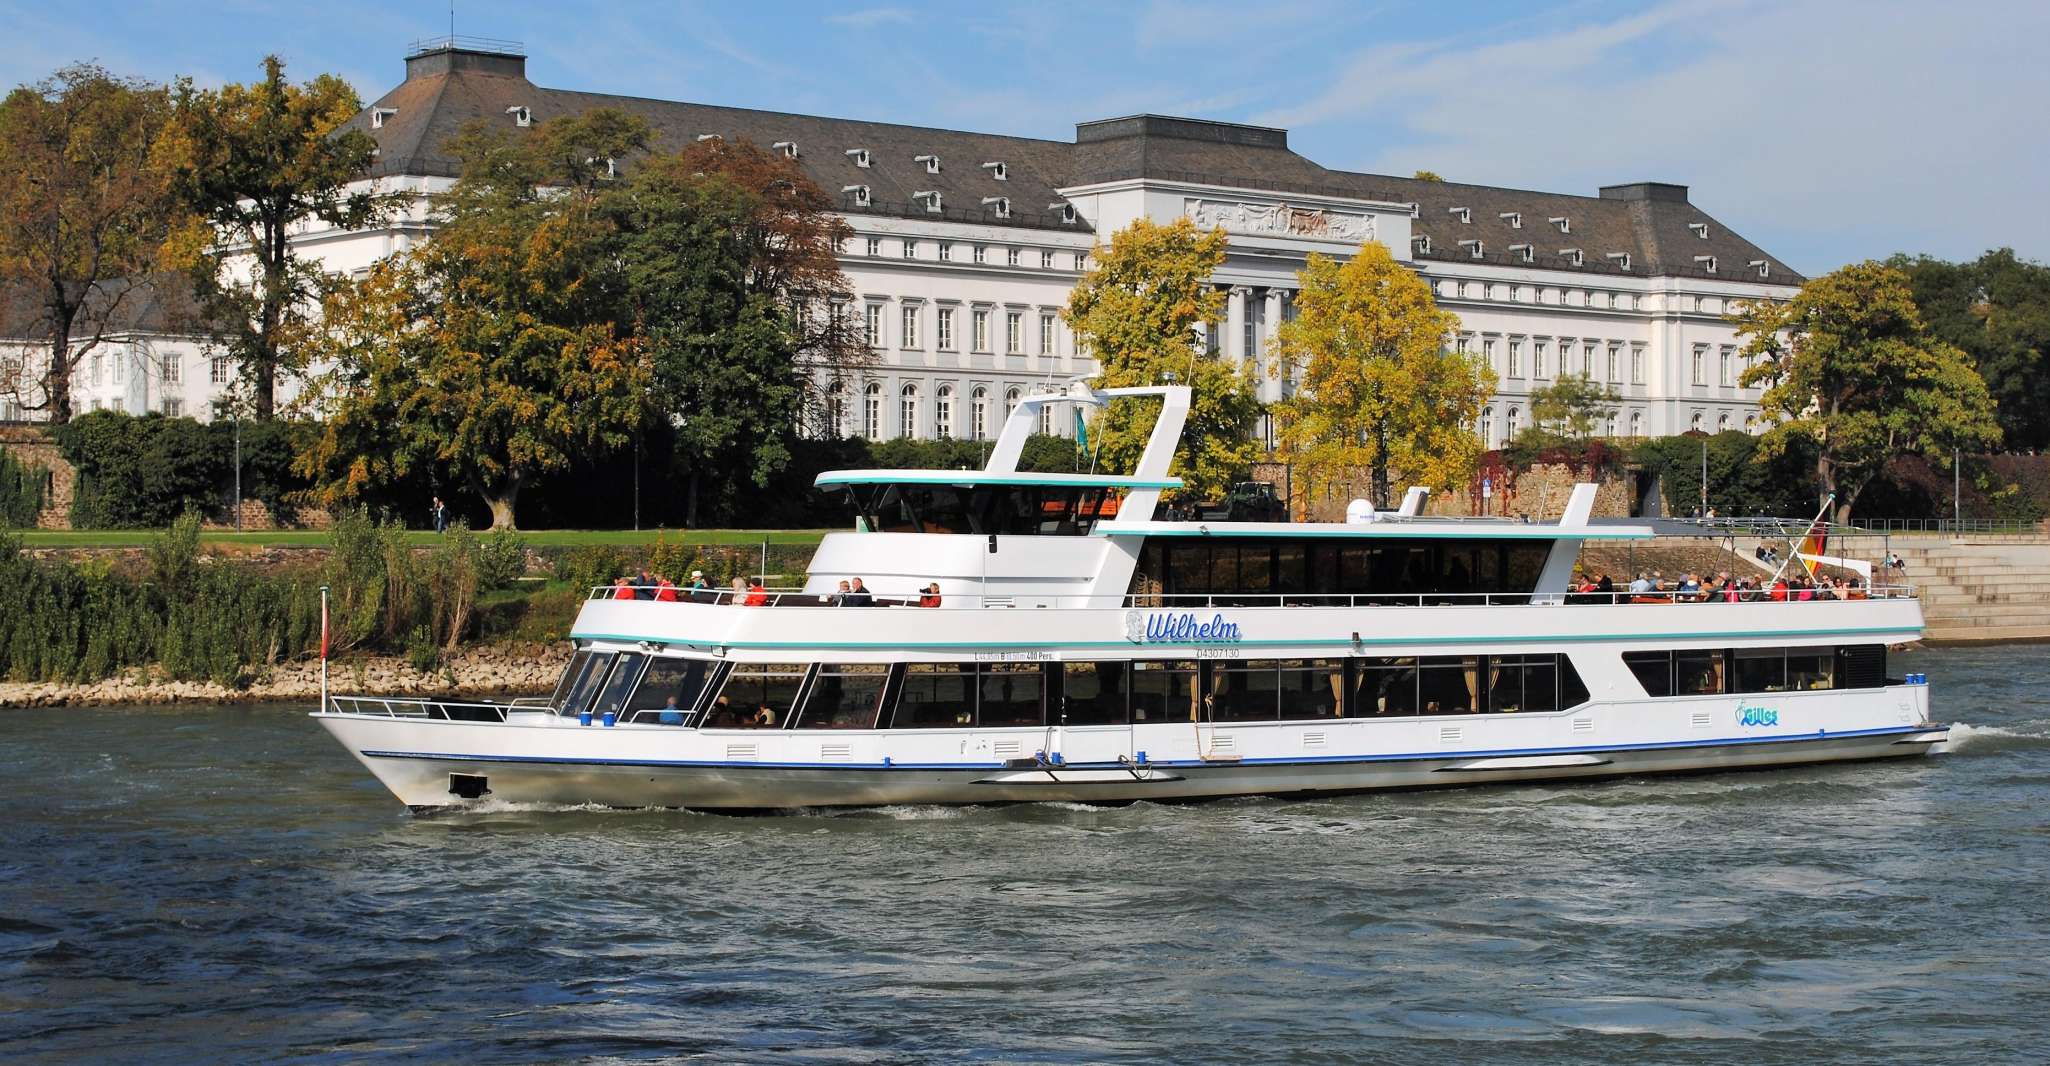 Koblenz, Rhine Valley Castles and Palaces Boat Tour - Housity